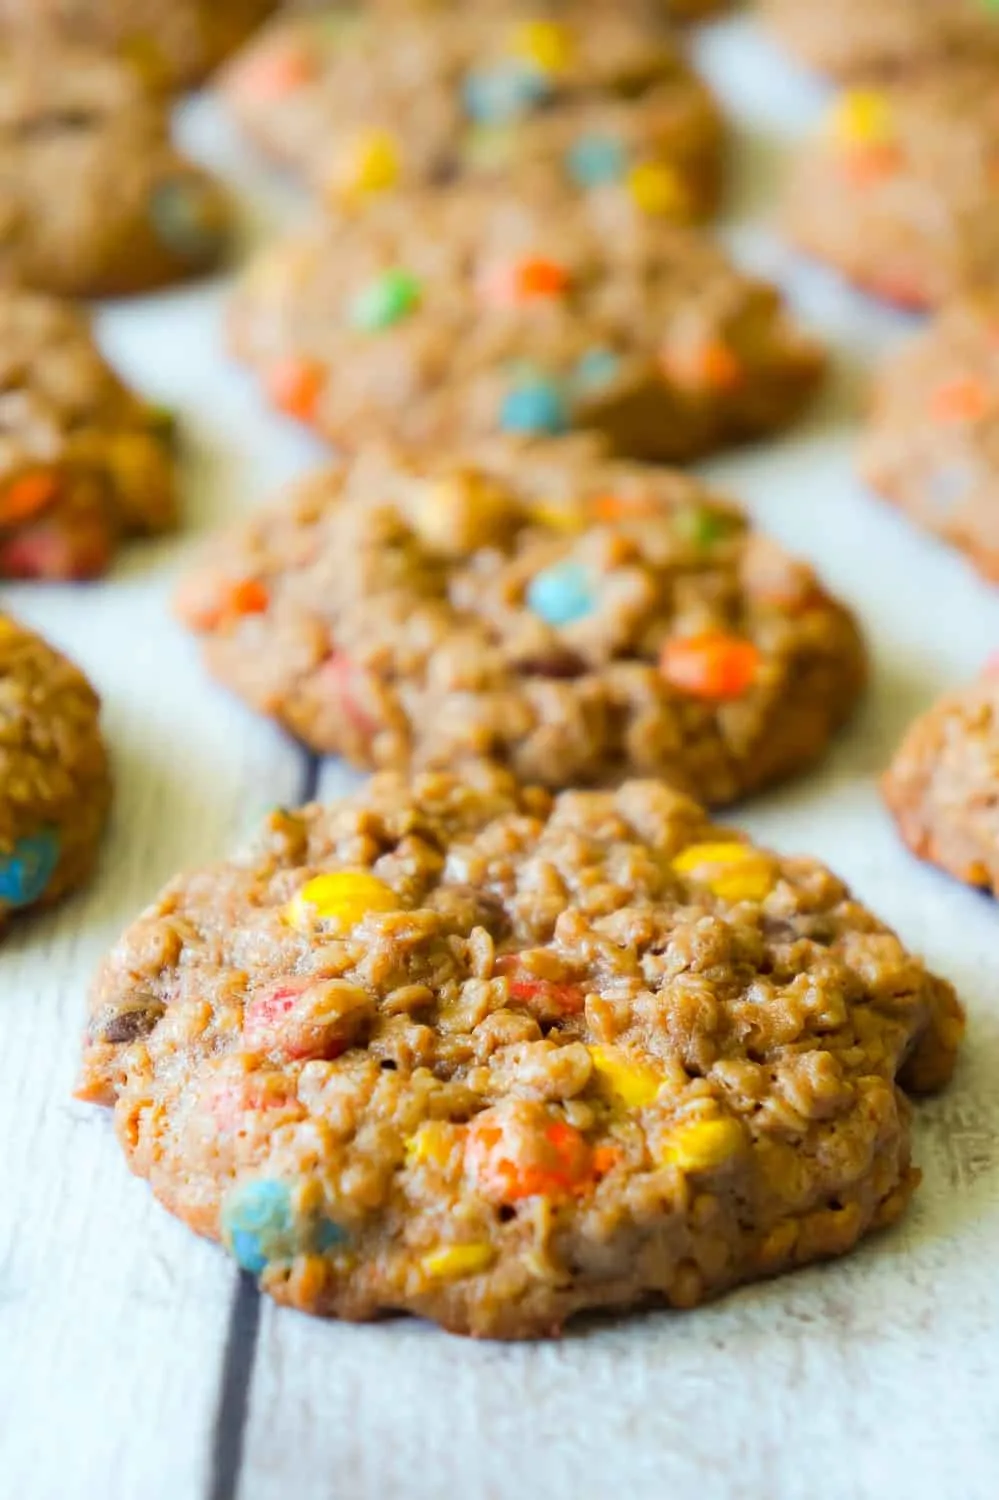 Chocolate Monster Cookies are an easy peanut butter dessert recipe using quick oats and mini M&M's. These chewy peanut butter cookies with cocoa powder are a delicious twist on the classic Monster Cookie.